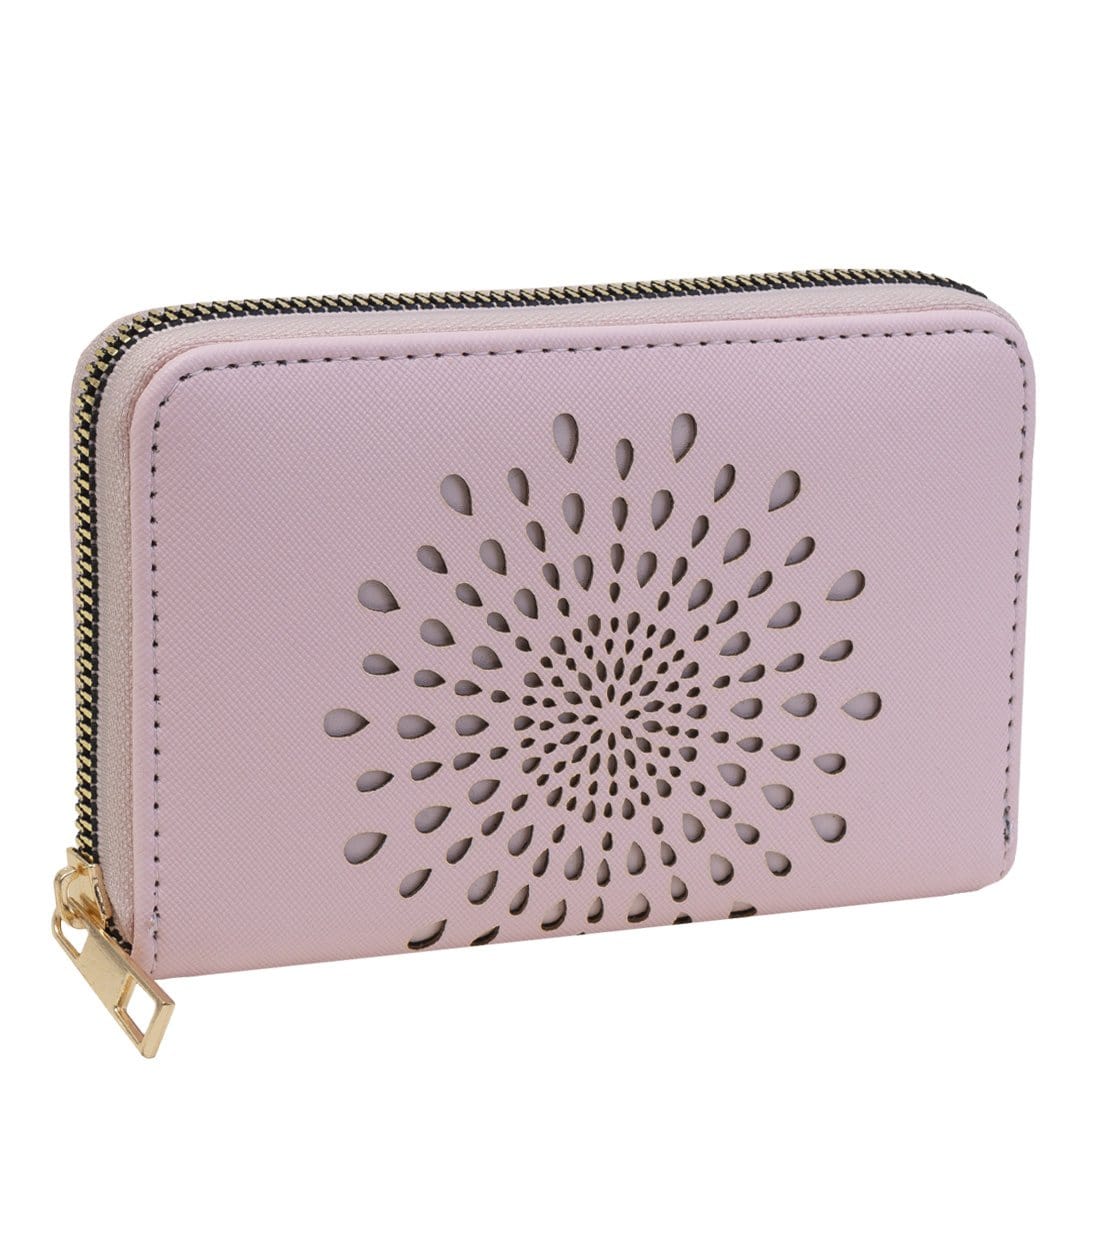 Rebecca & Rifka Vegan Saffiano Leather Rose Perforated Zip Around Compact Indexer Wristlet Wallet